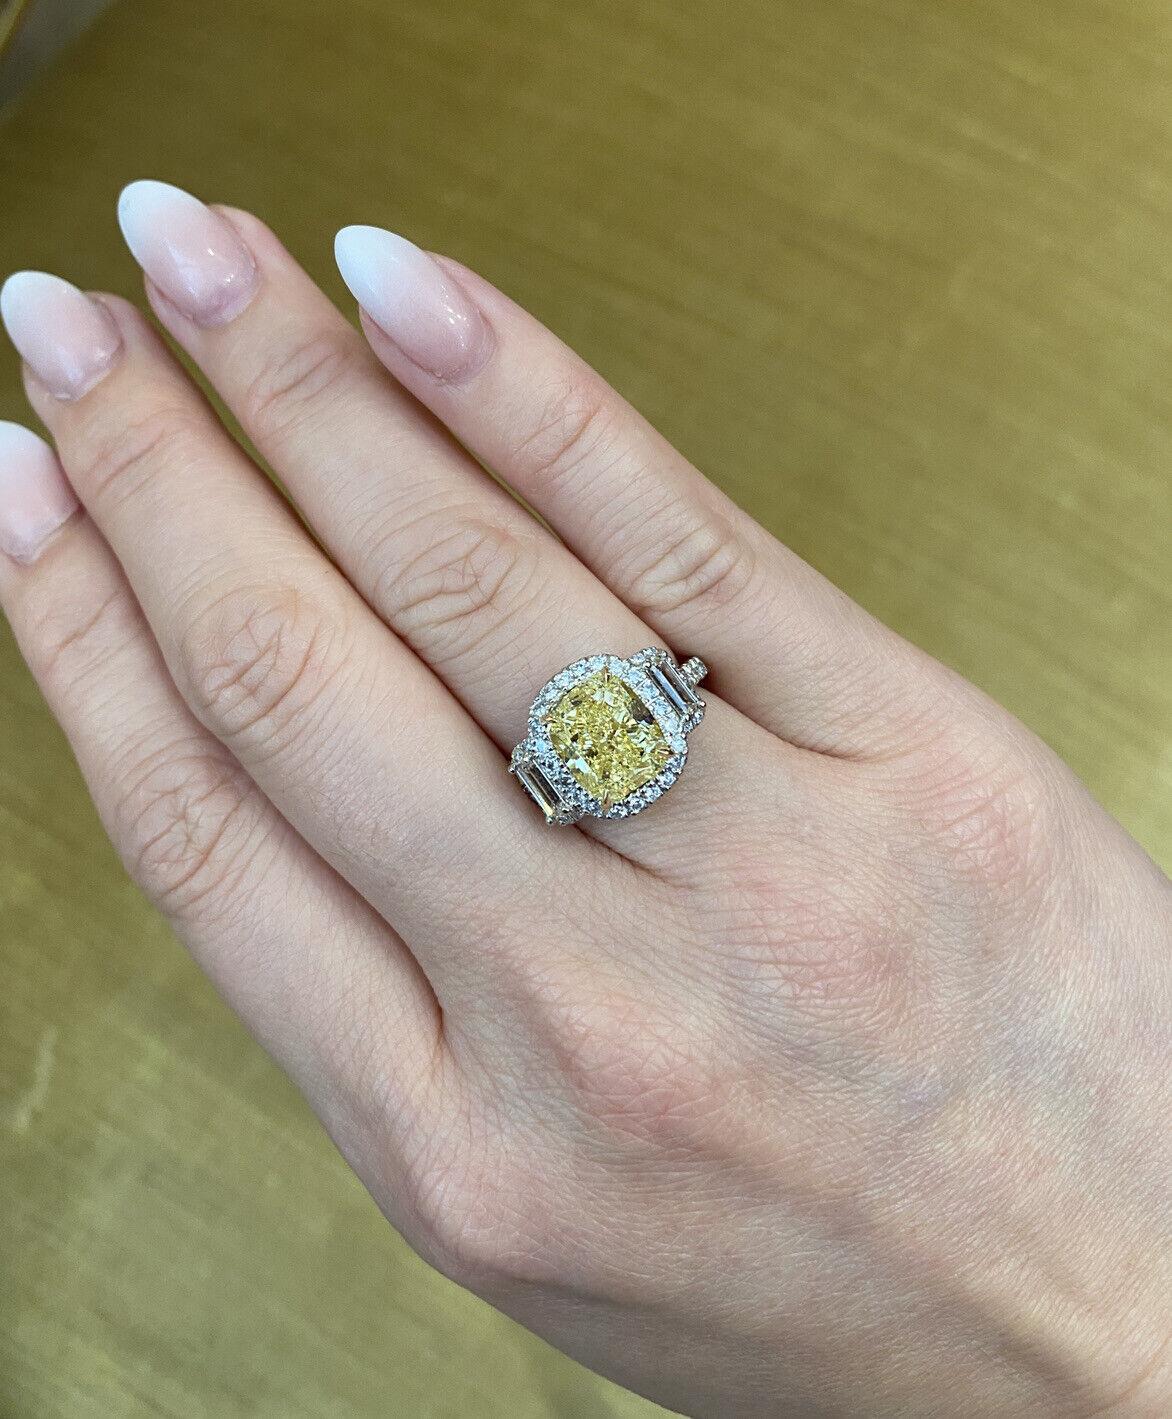 Custom made
Fancy Yellow Diamond Ring
in Platinum & 18k Yellow Gold

features
Center Fancy Yellow Diamond
Cushion Modified Brilliant
weighing 4.02 carats
VS1 clarity
GIA certified

Surrounded by
52 Round Brilliant Diamonds weighing .77 carat
and 2